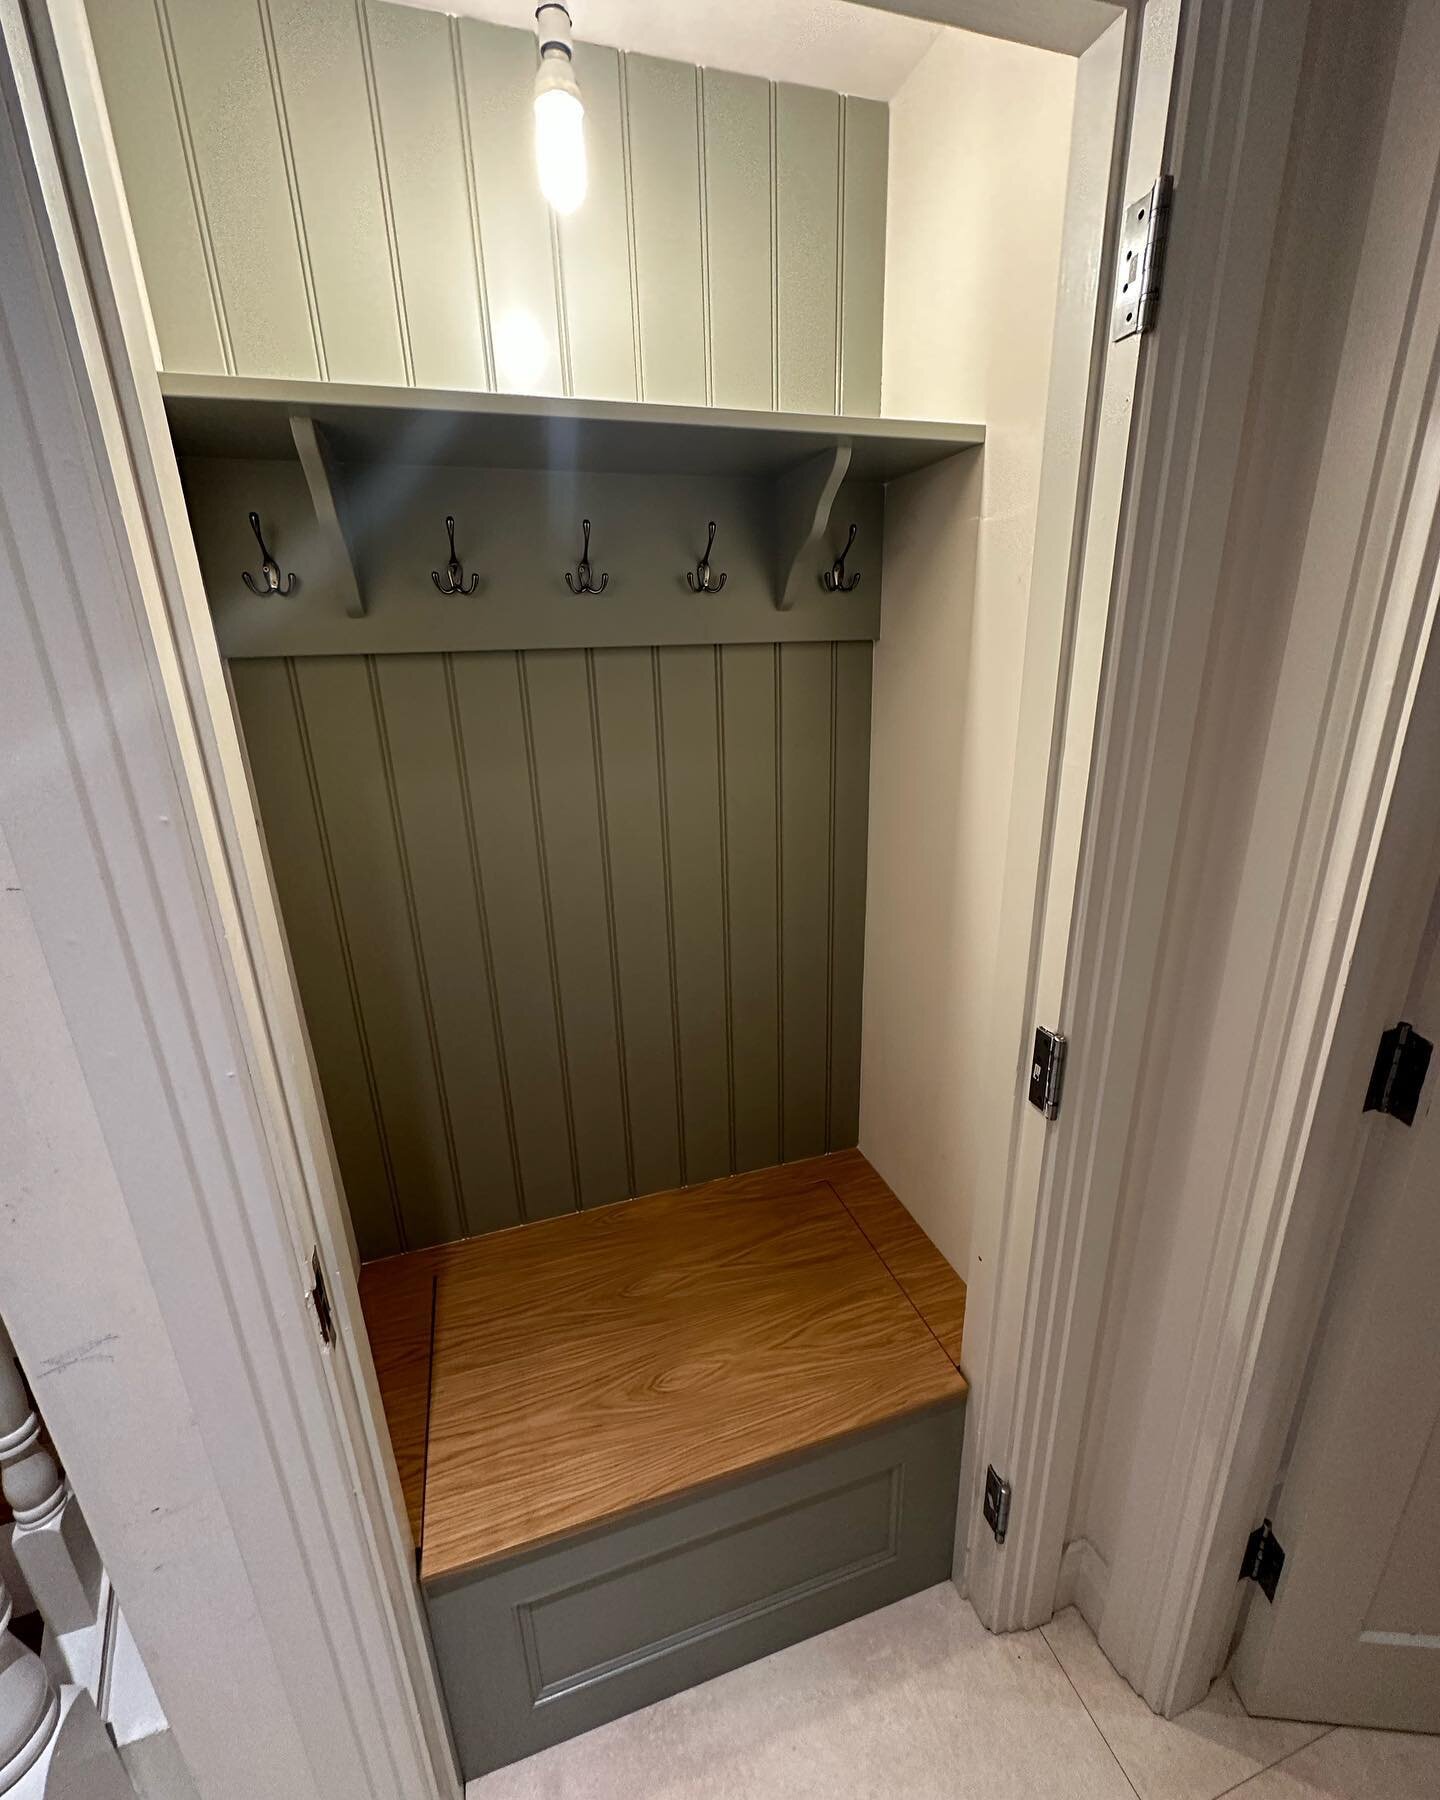 Part of yesterdays fit, before we started this was a standard press and now it has been transformed into a bespoke boot room unit. Making the most of the space with a lift up seat for added storage. 

Sprayed in &ldquo;silver birch&rdquo; from @colou